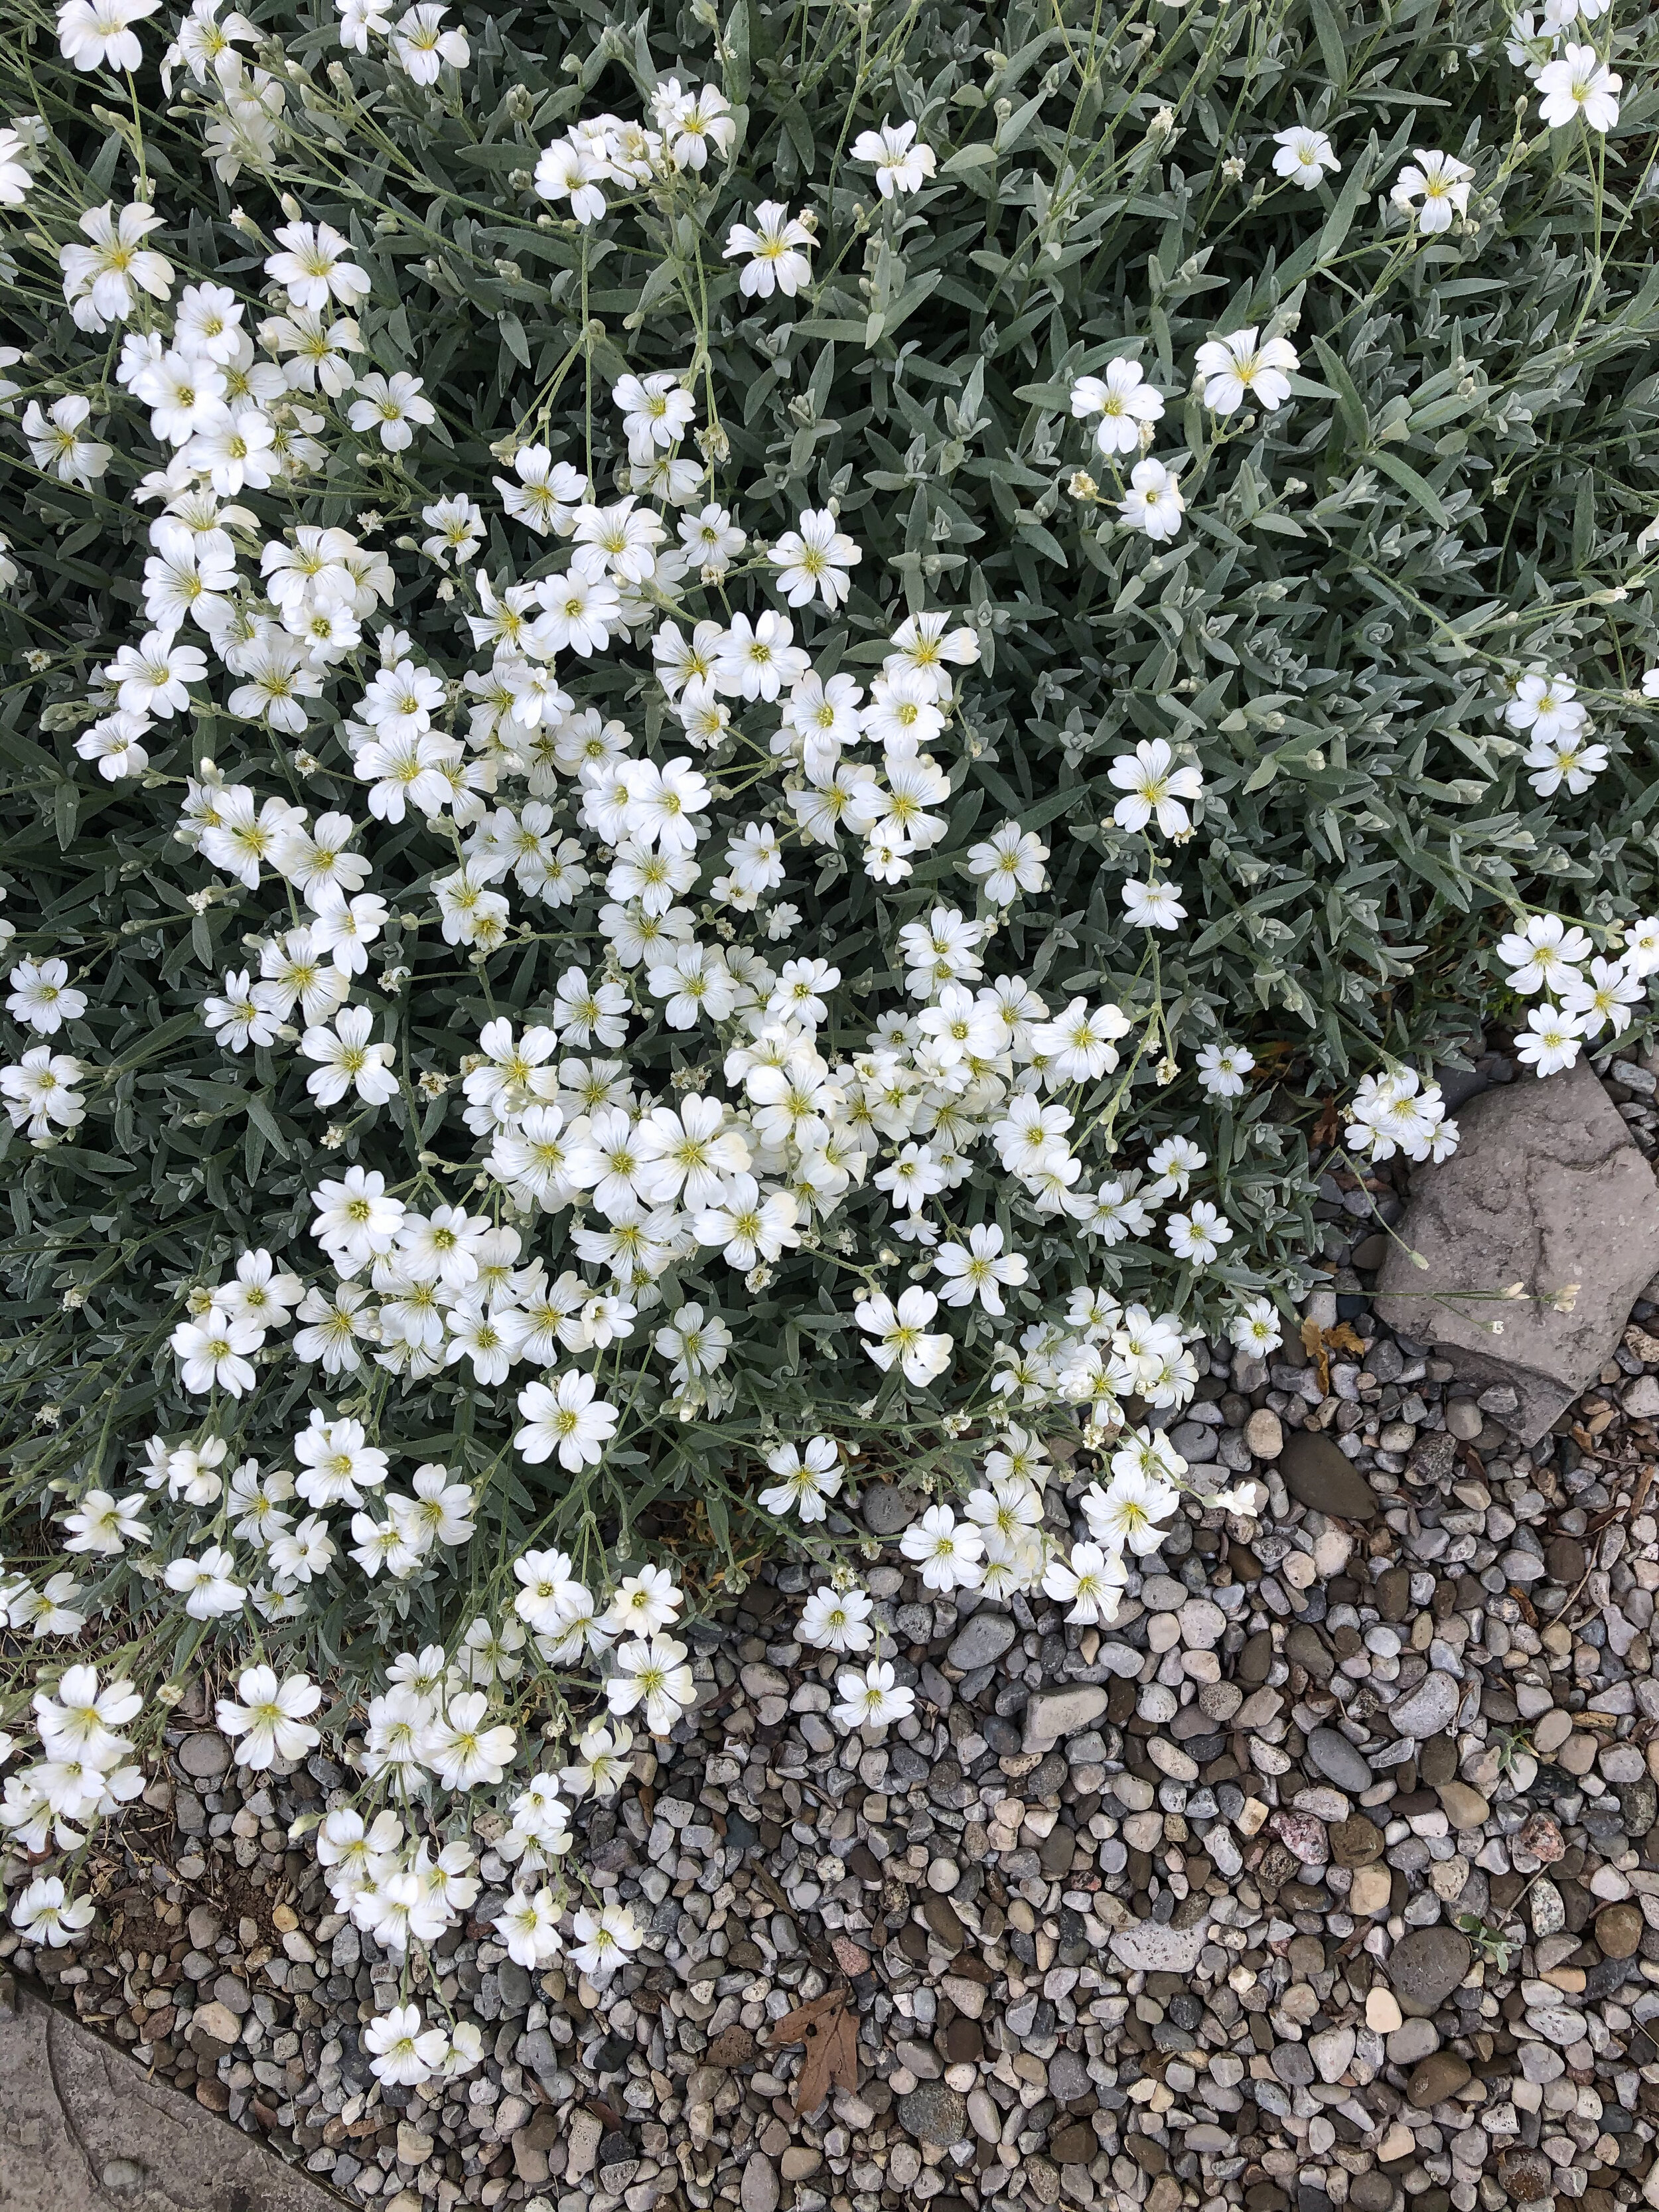 The elegant clear white flowers and silvery-grey foliage gives the plant a mediterranean feel that works well in a rock garden location or along a pea-gravel path like it is seen here.